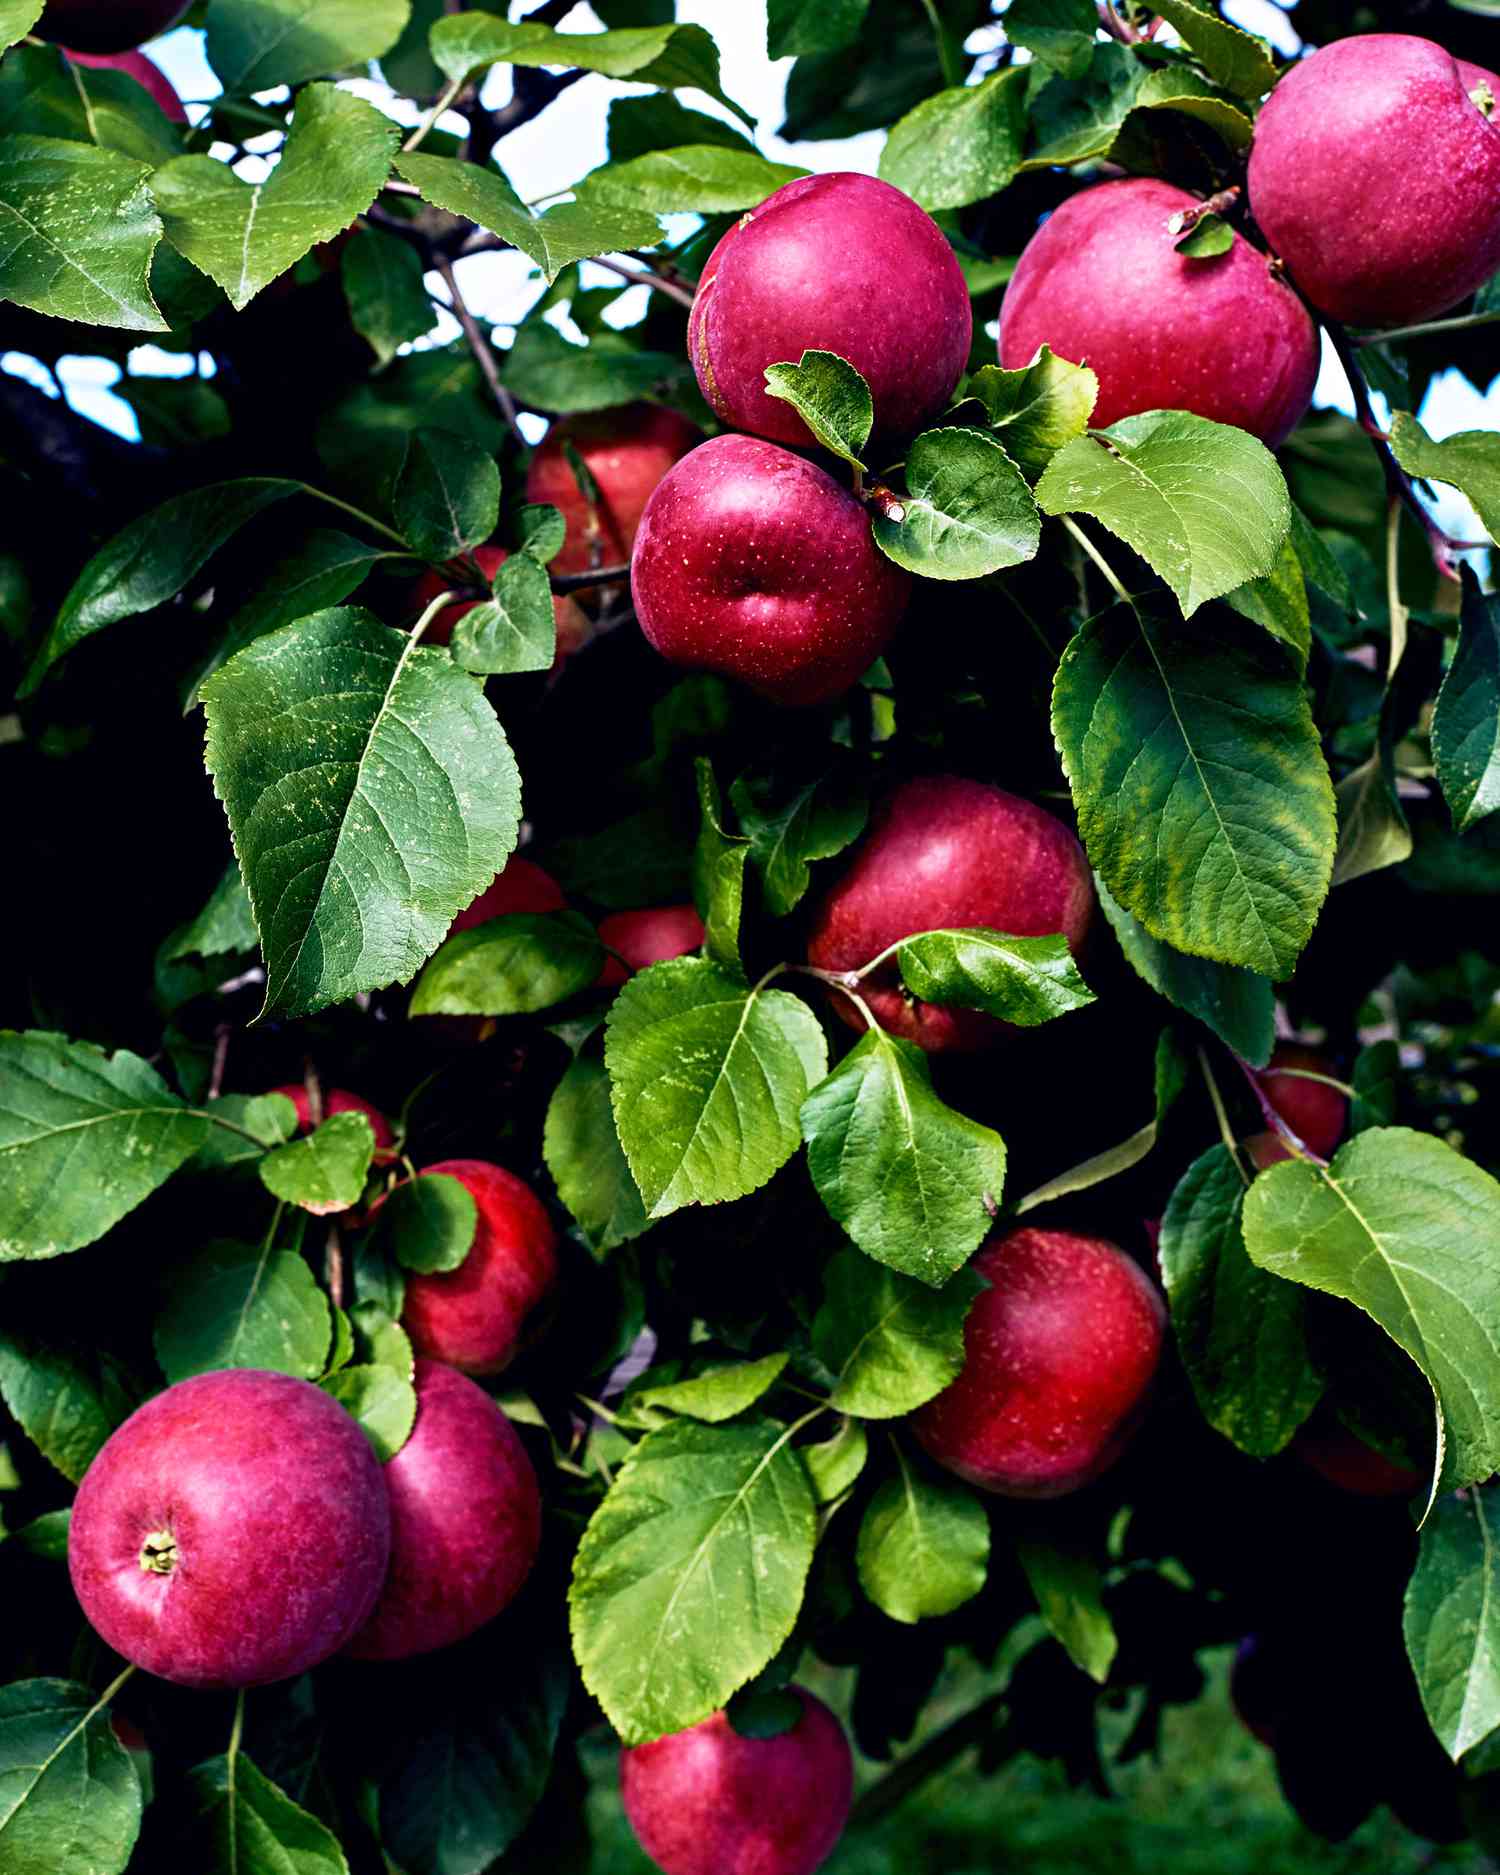 gravenstein apples on tree with leaves